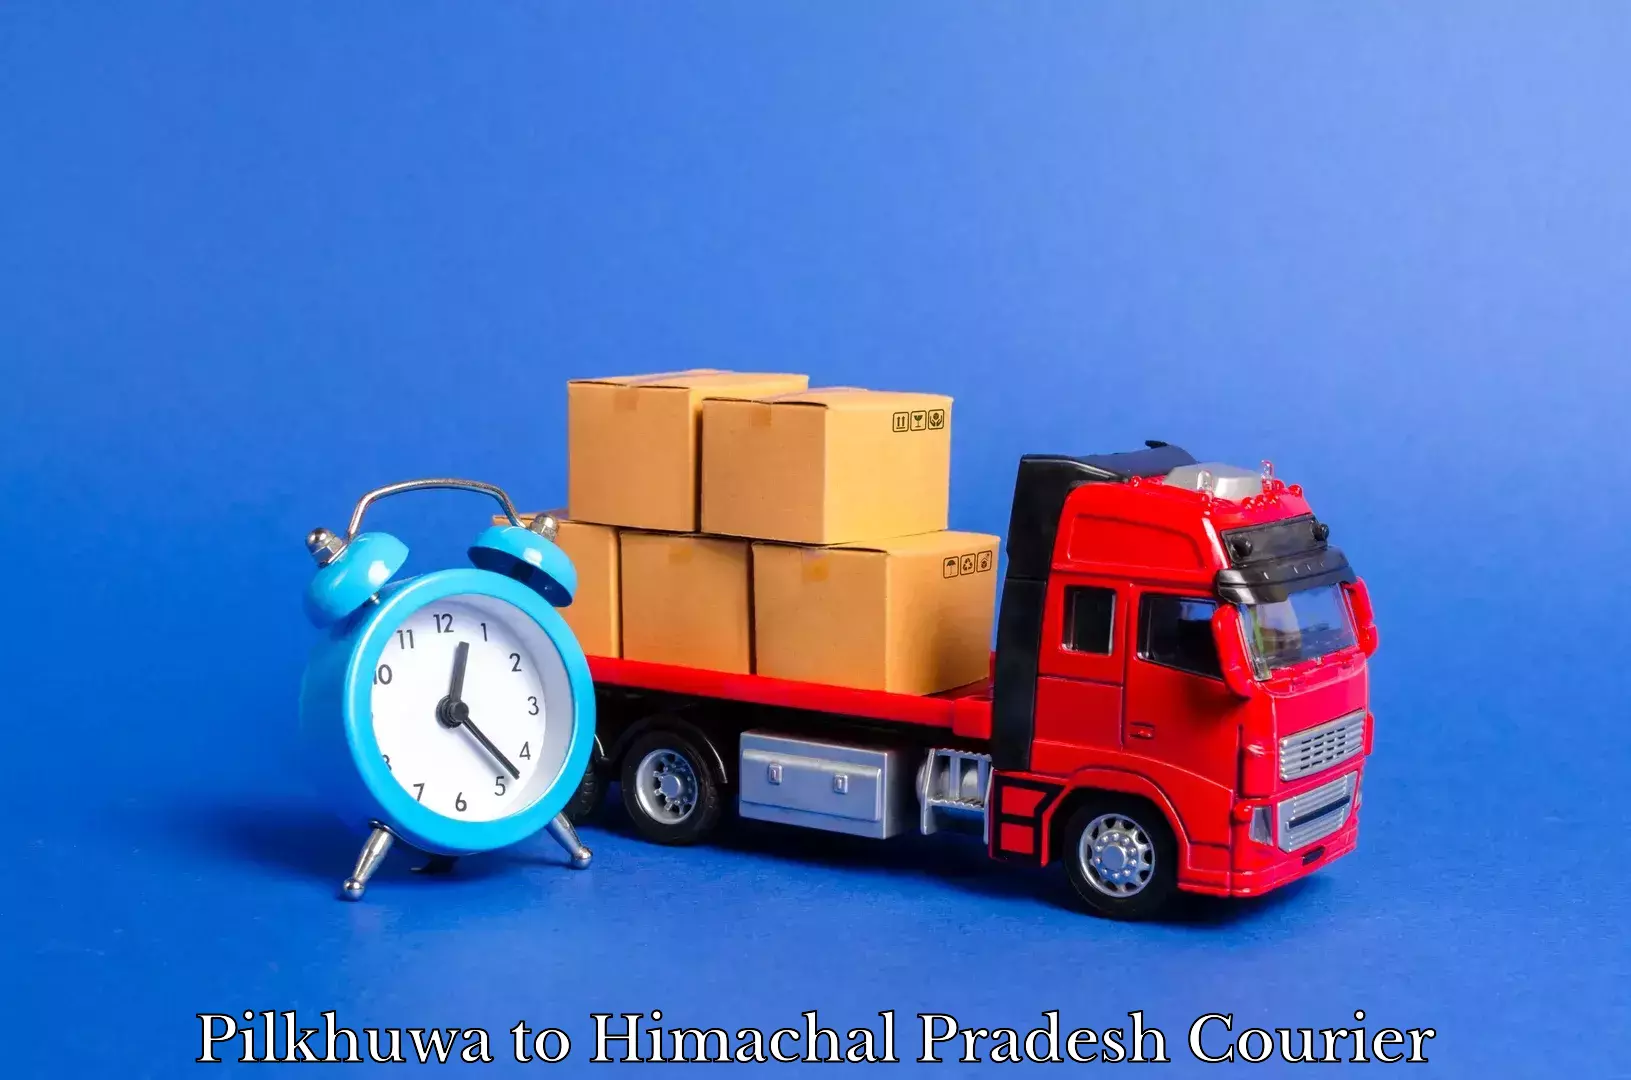 Quality relocation services in Pilkhuwa to Darlaghat